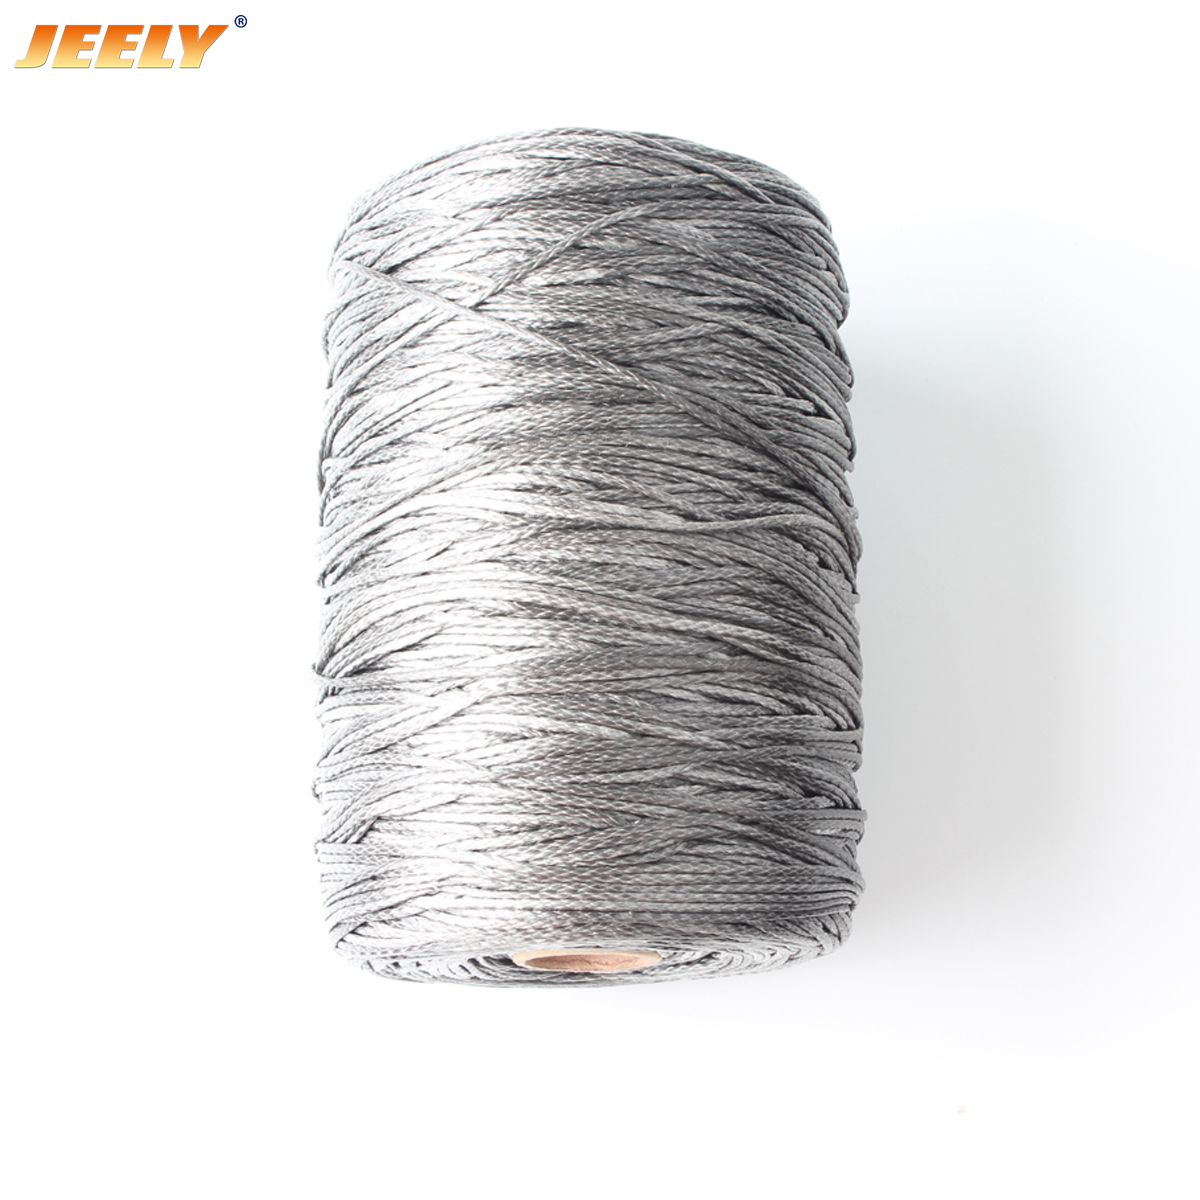 Jeely 1000M 1mm 6 Weaves Braided Towing Winch Line Spectra Windenseil 220lbs